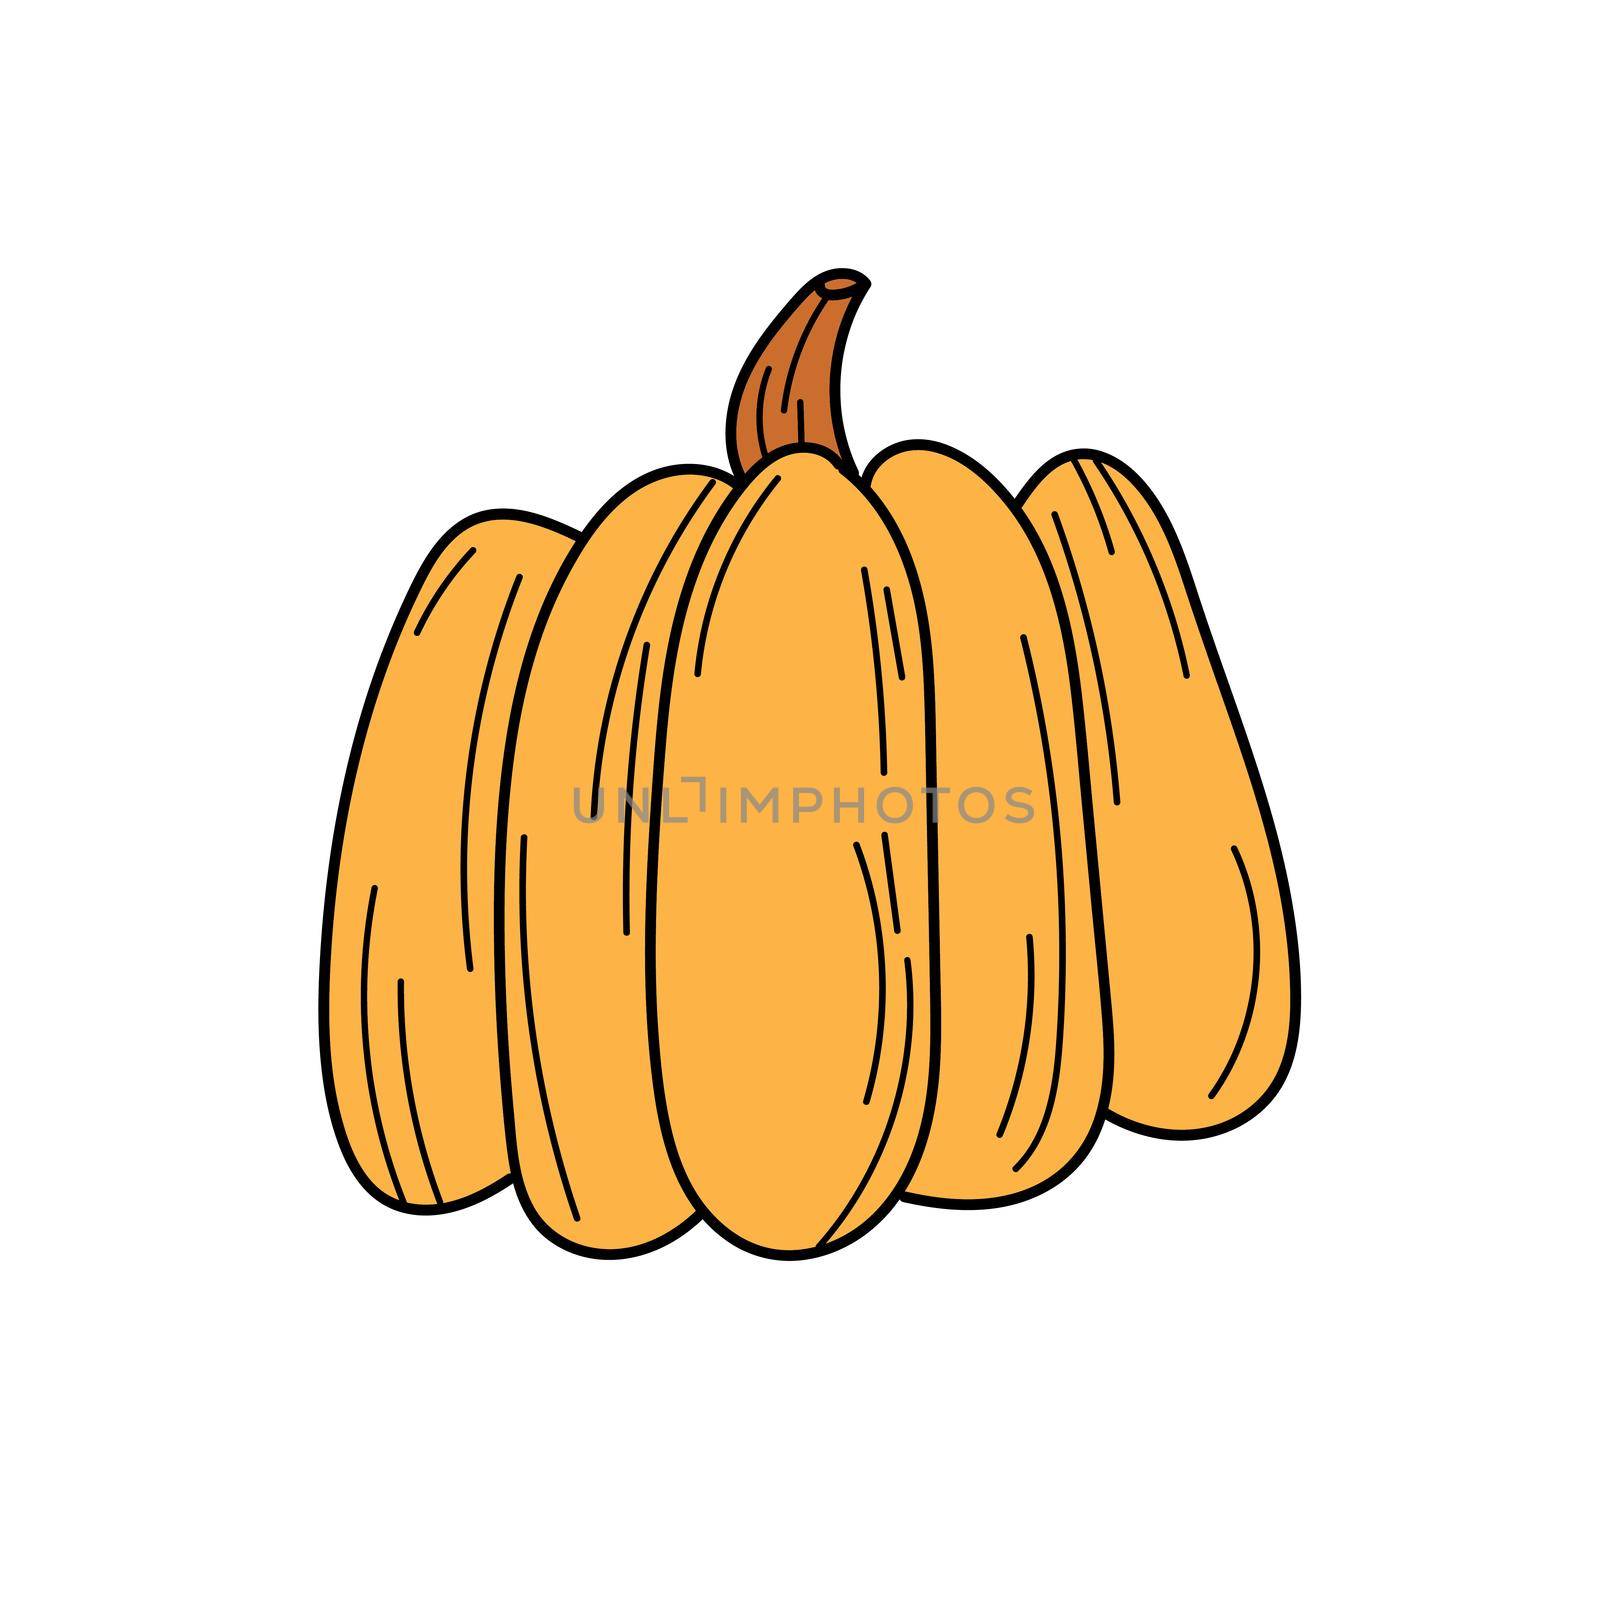 Vector hand drawn pumpkin doodle icon. Food sketch illustration for print, web, mobile and infographics isolated on white background.